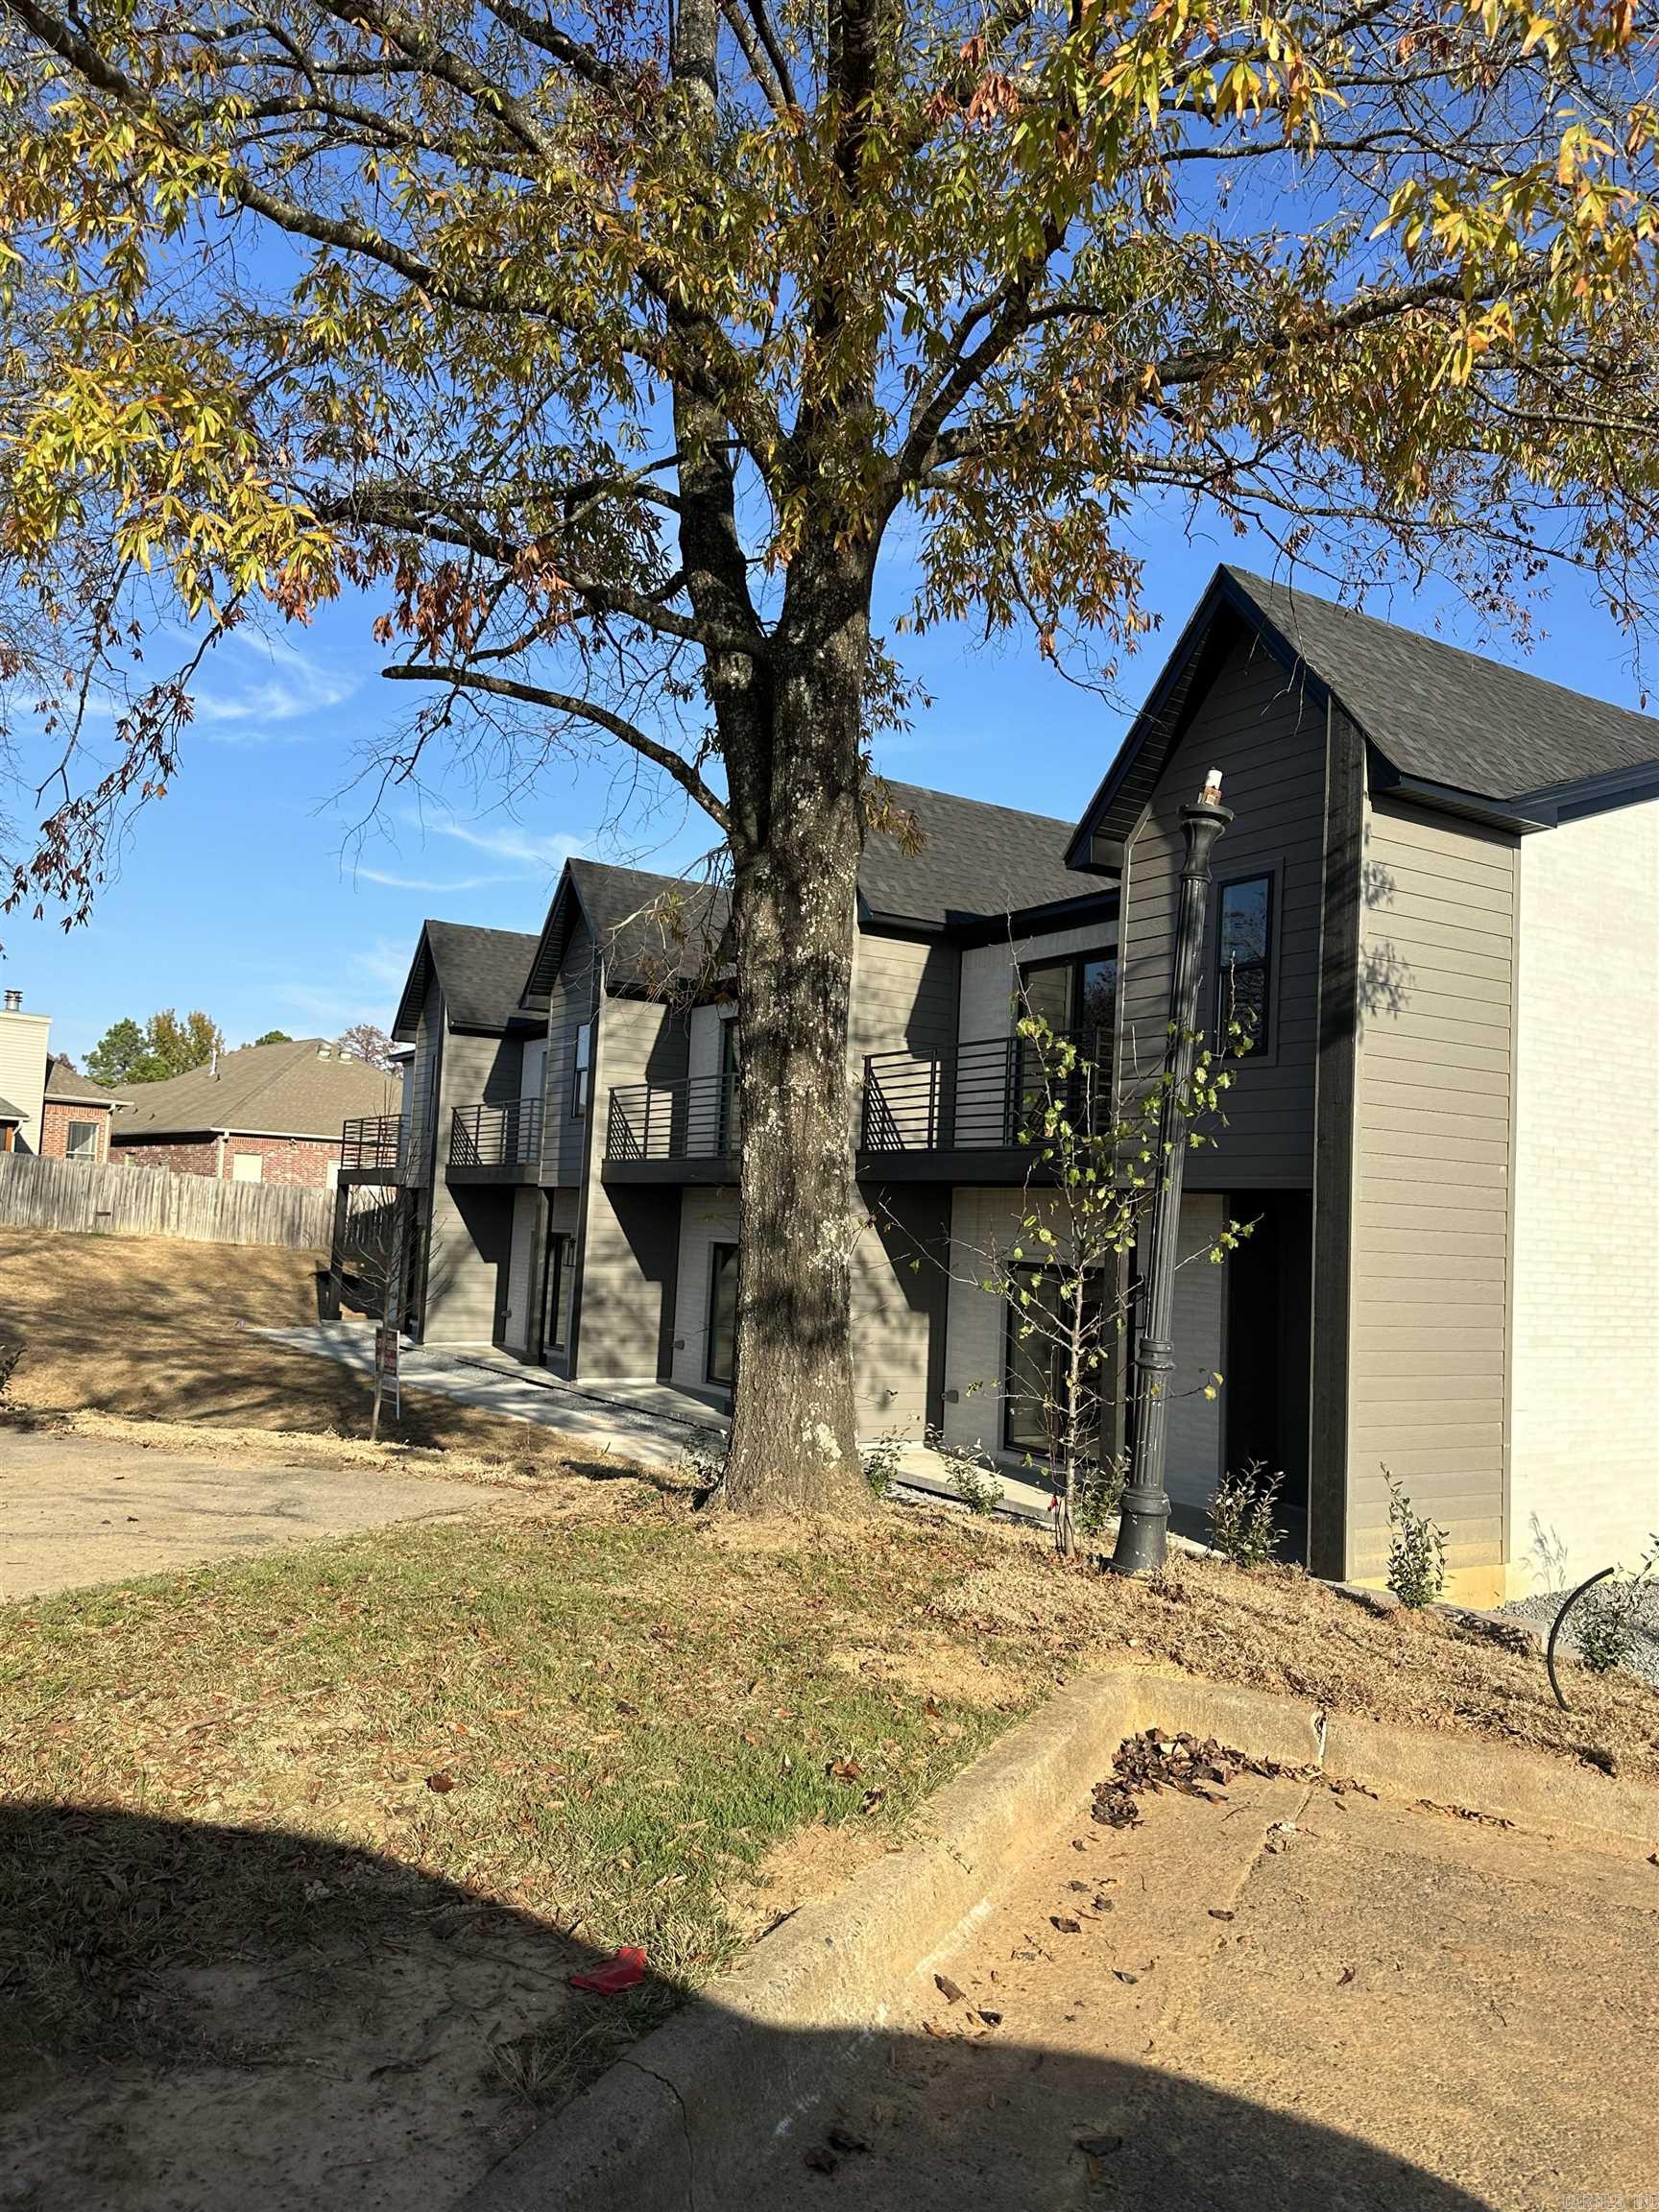 View Maumelle, AR 72113 townhome